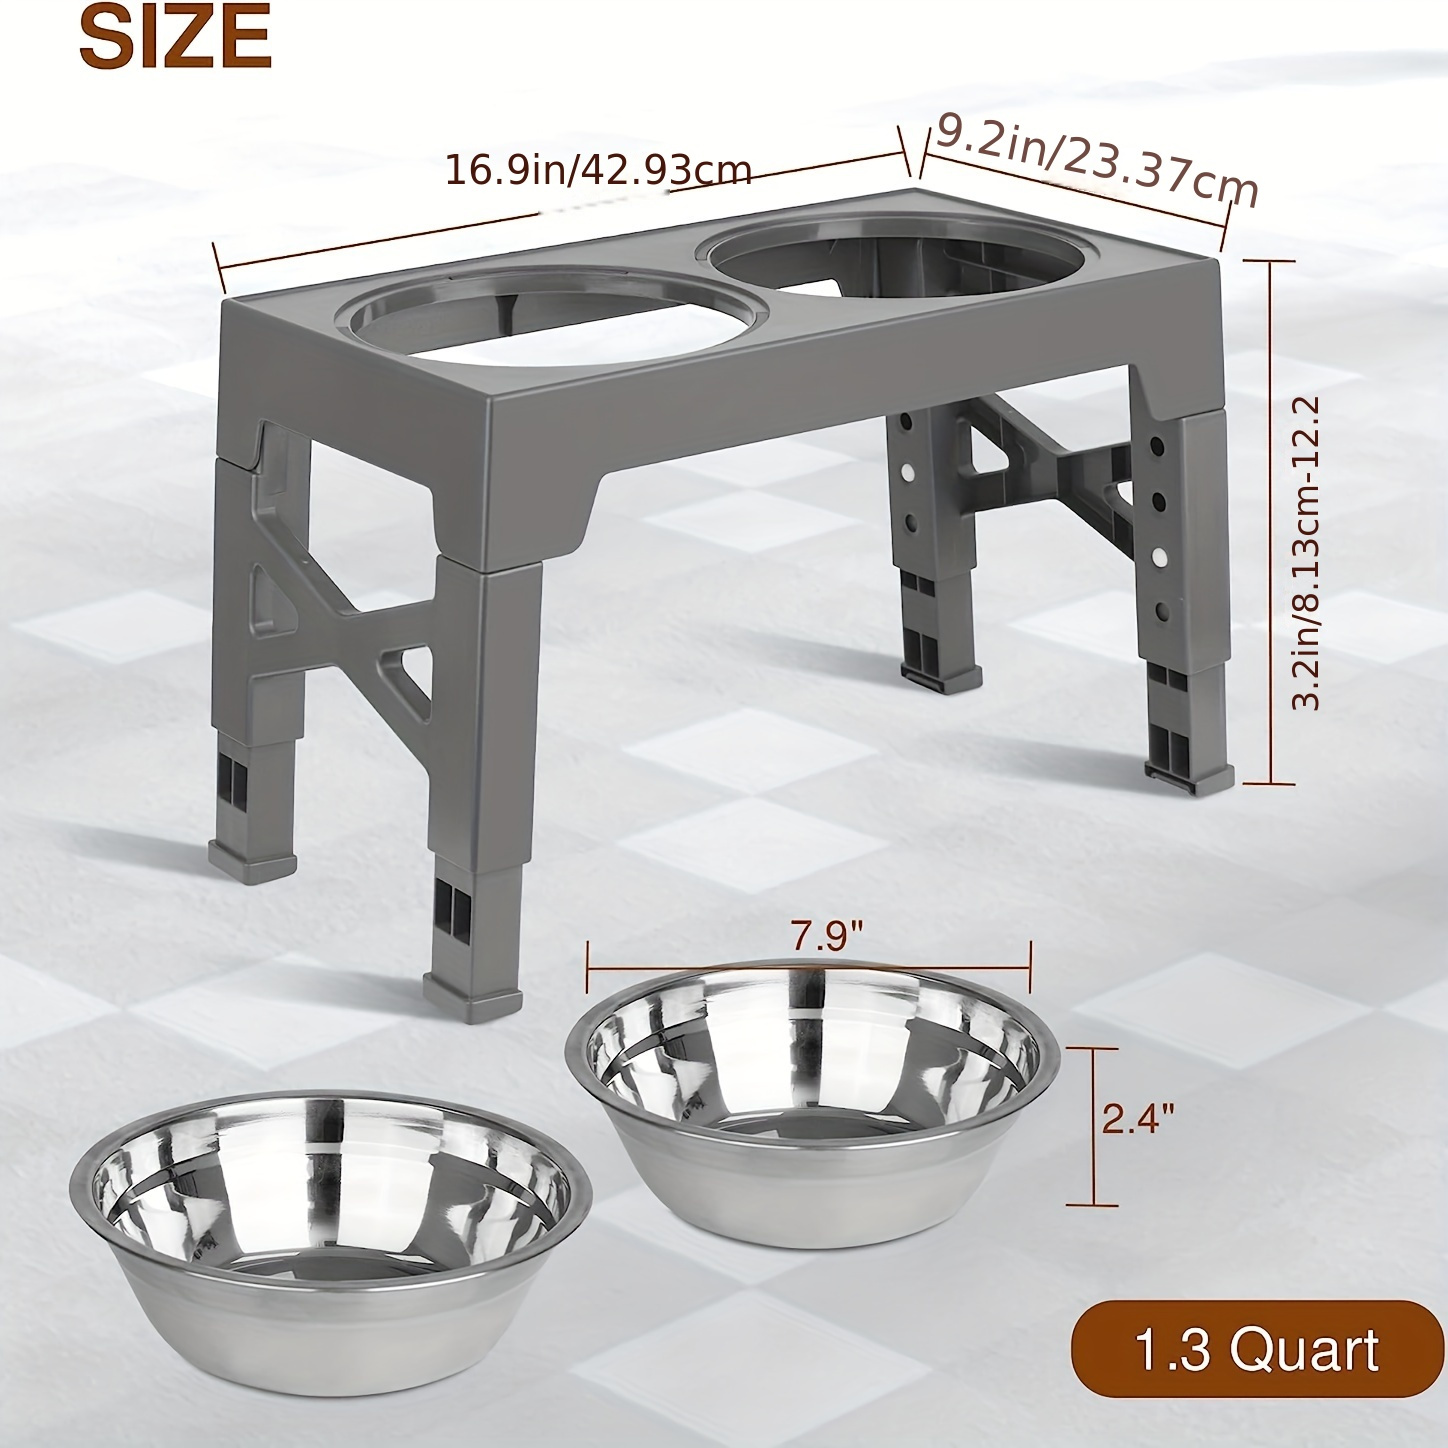 Adjustable Raised Pet Bowls with 2 Bowls for Dogs - Stainless Steel Elevated  Pet Feeder, Dog Water Dishes Station Food Bowls Stand for Medium Large Dogs